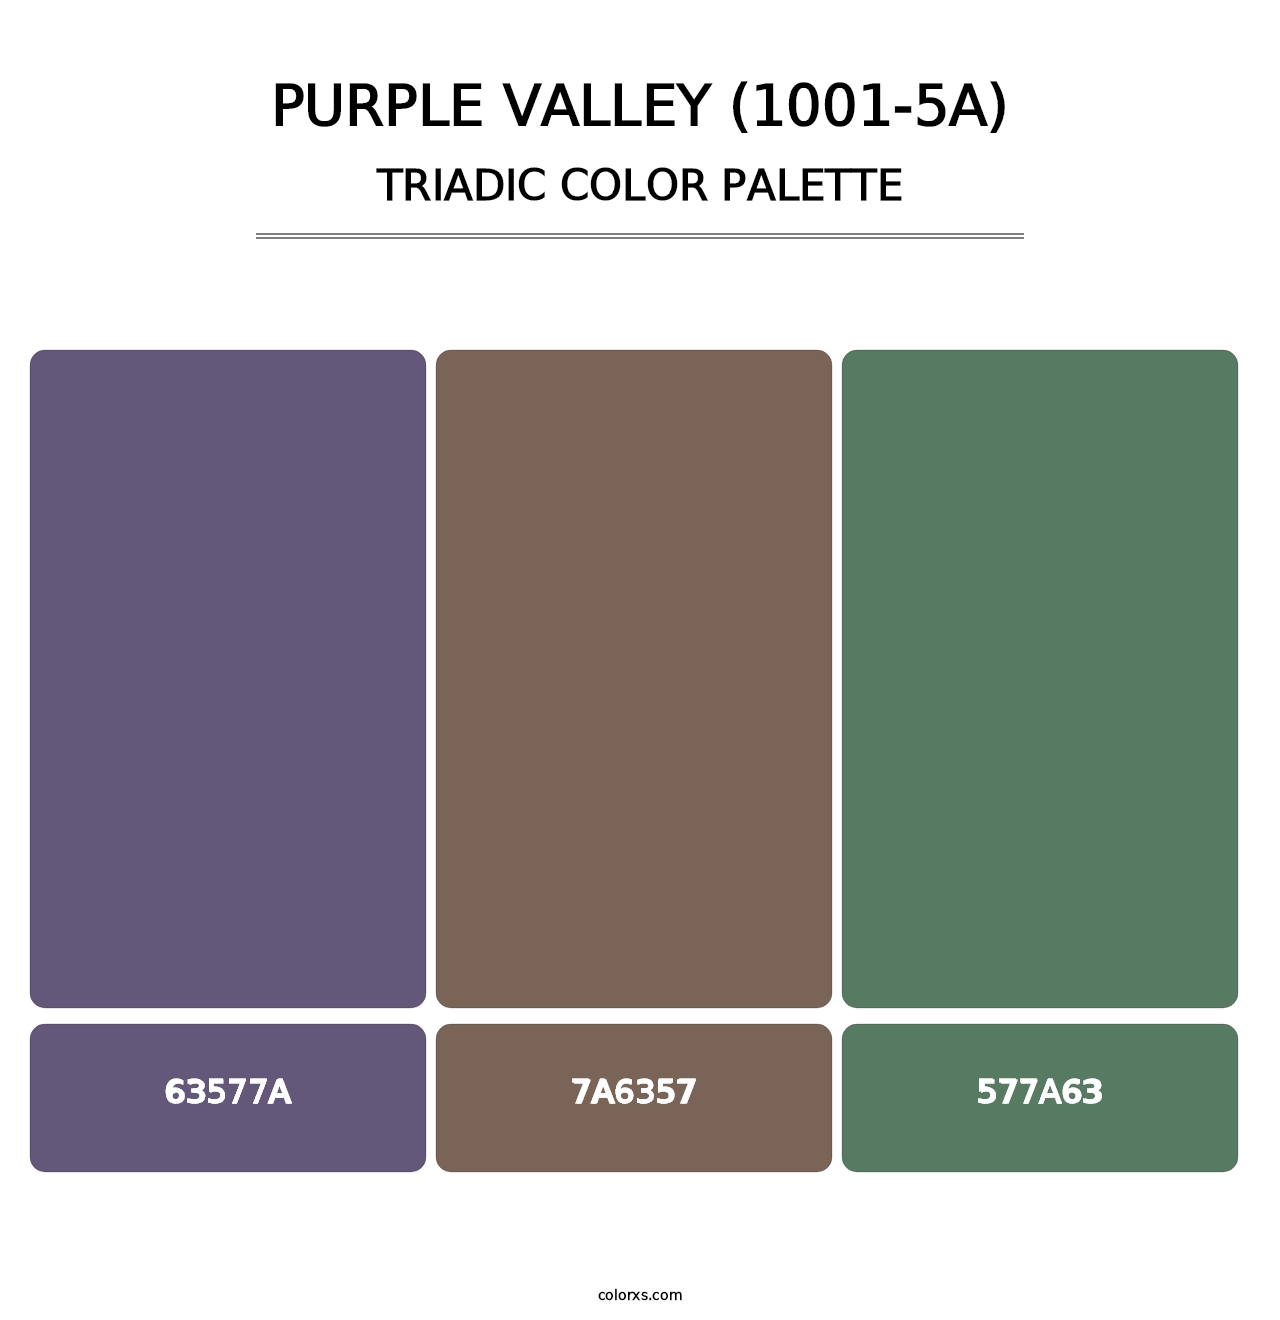 Purple Valley (1001-5A) - Triadic Color Palette